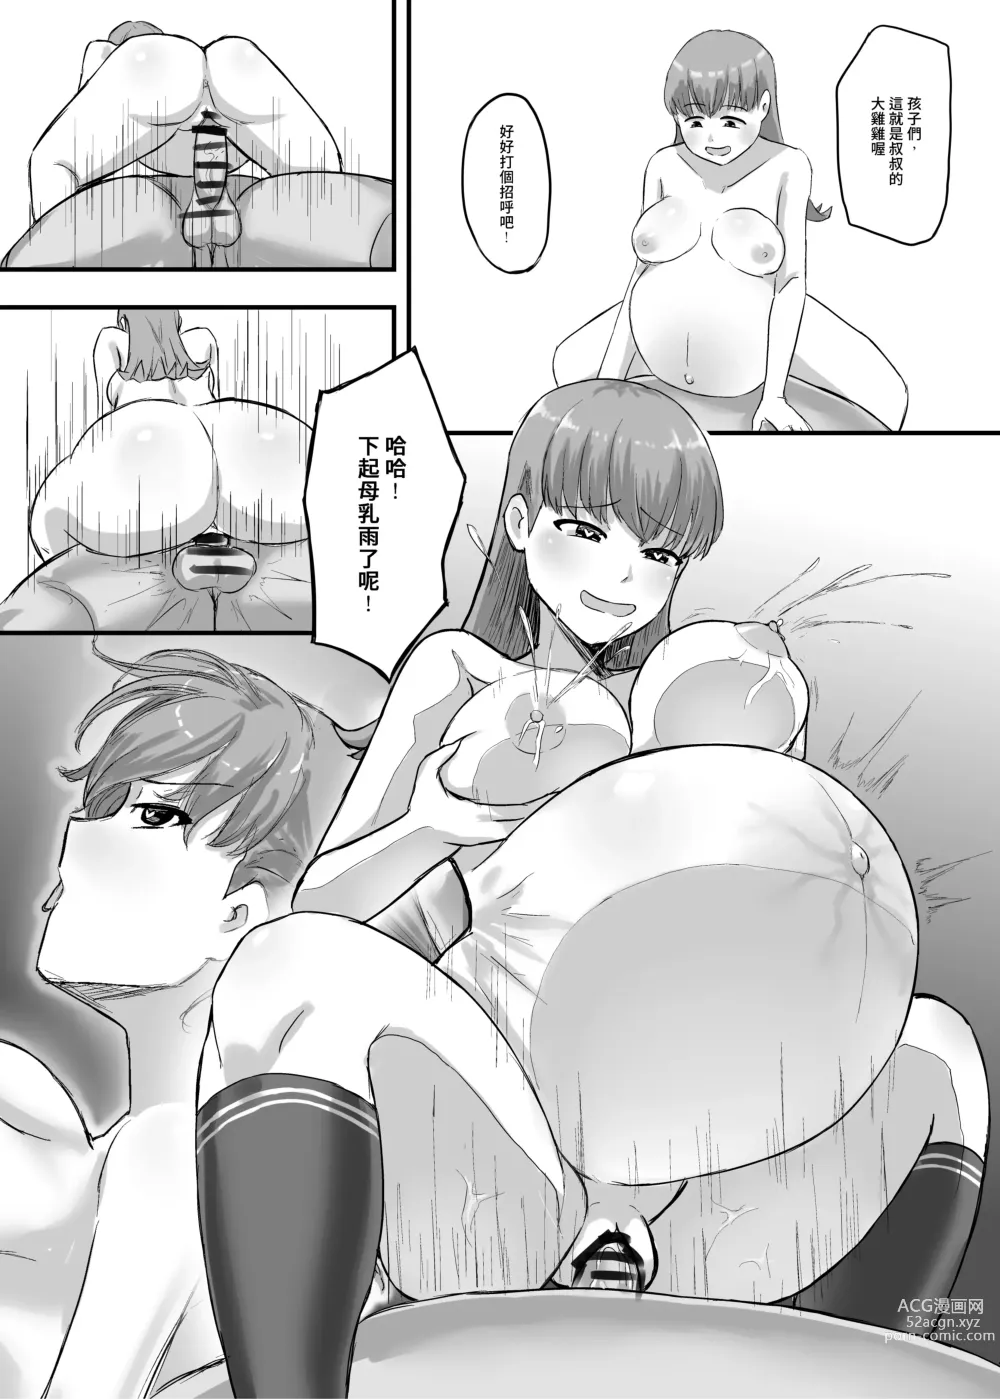 Page 21 of doujinshi Oi who was tempted